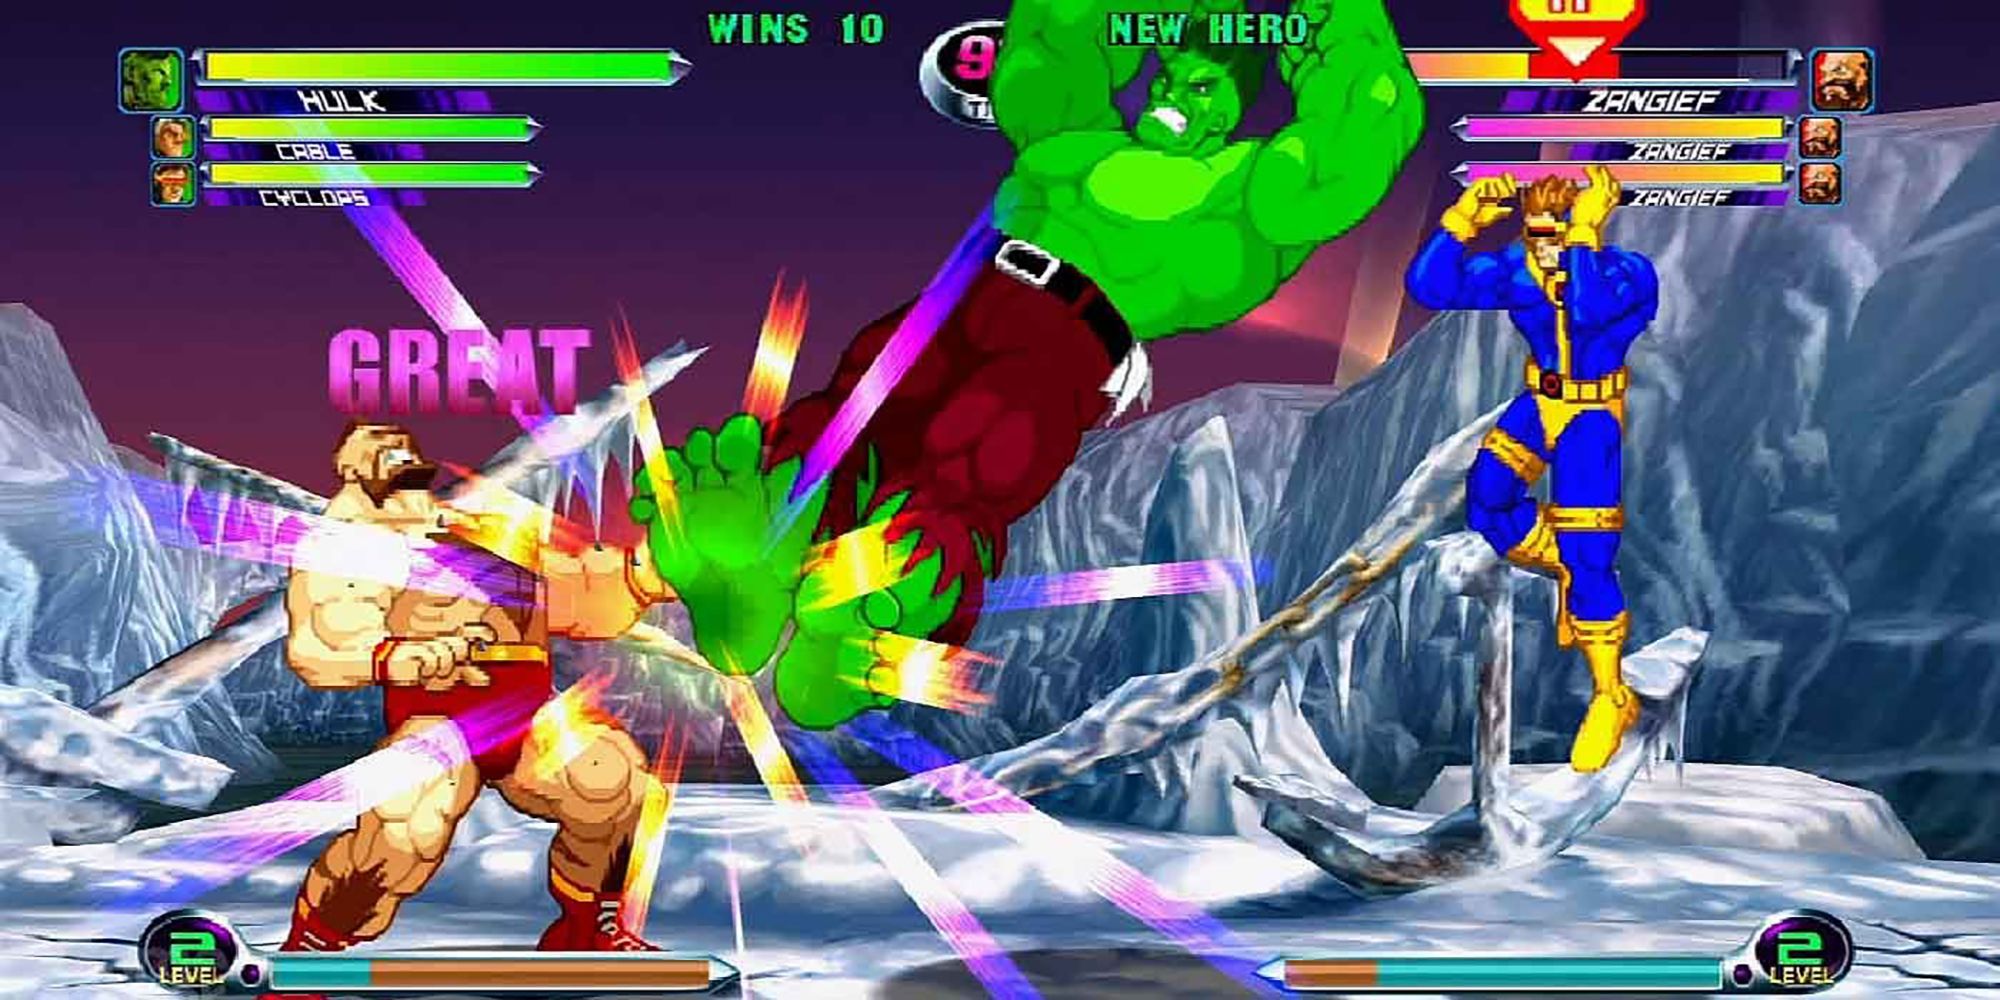 Zangief gets kicked by The Hulk while Cyclops leaps in for an assist attack in Marvel Vs Capcom 2.